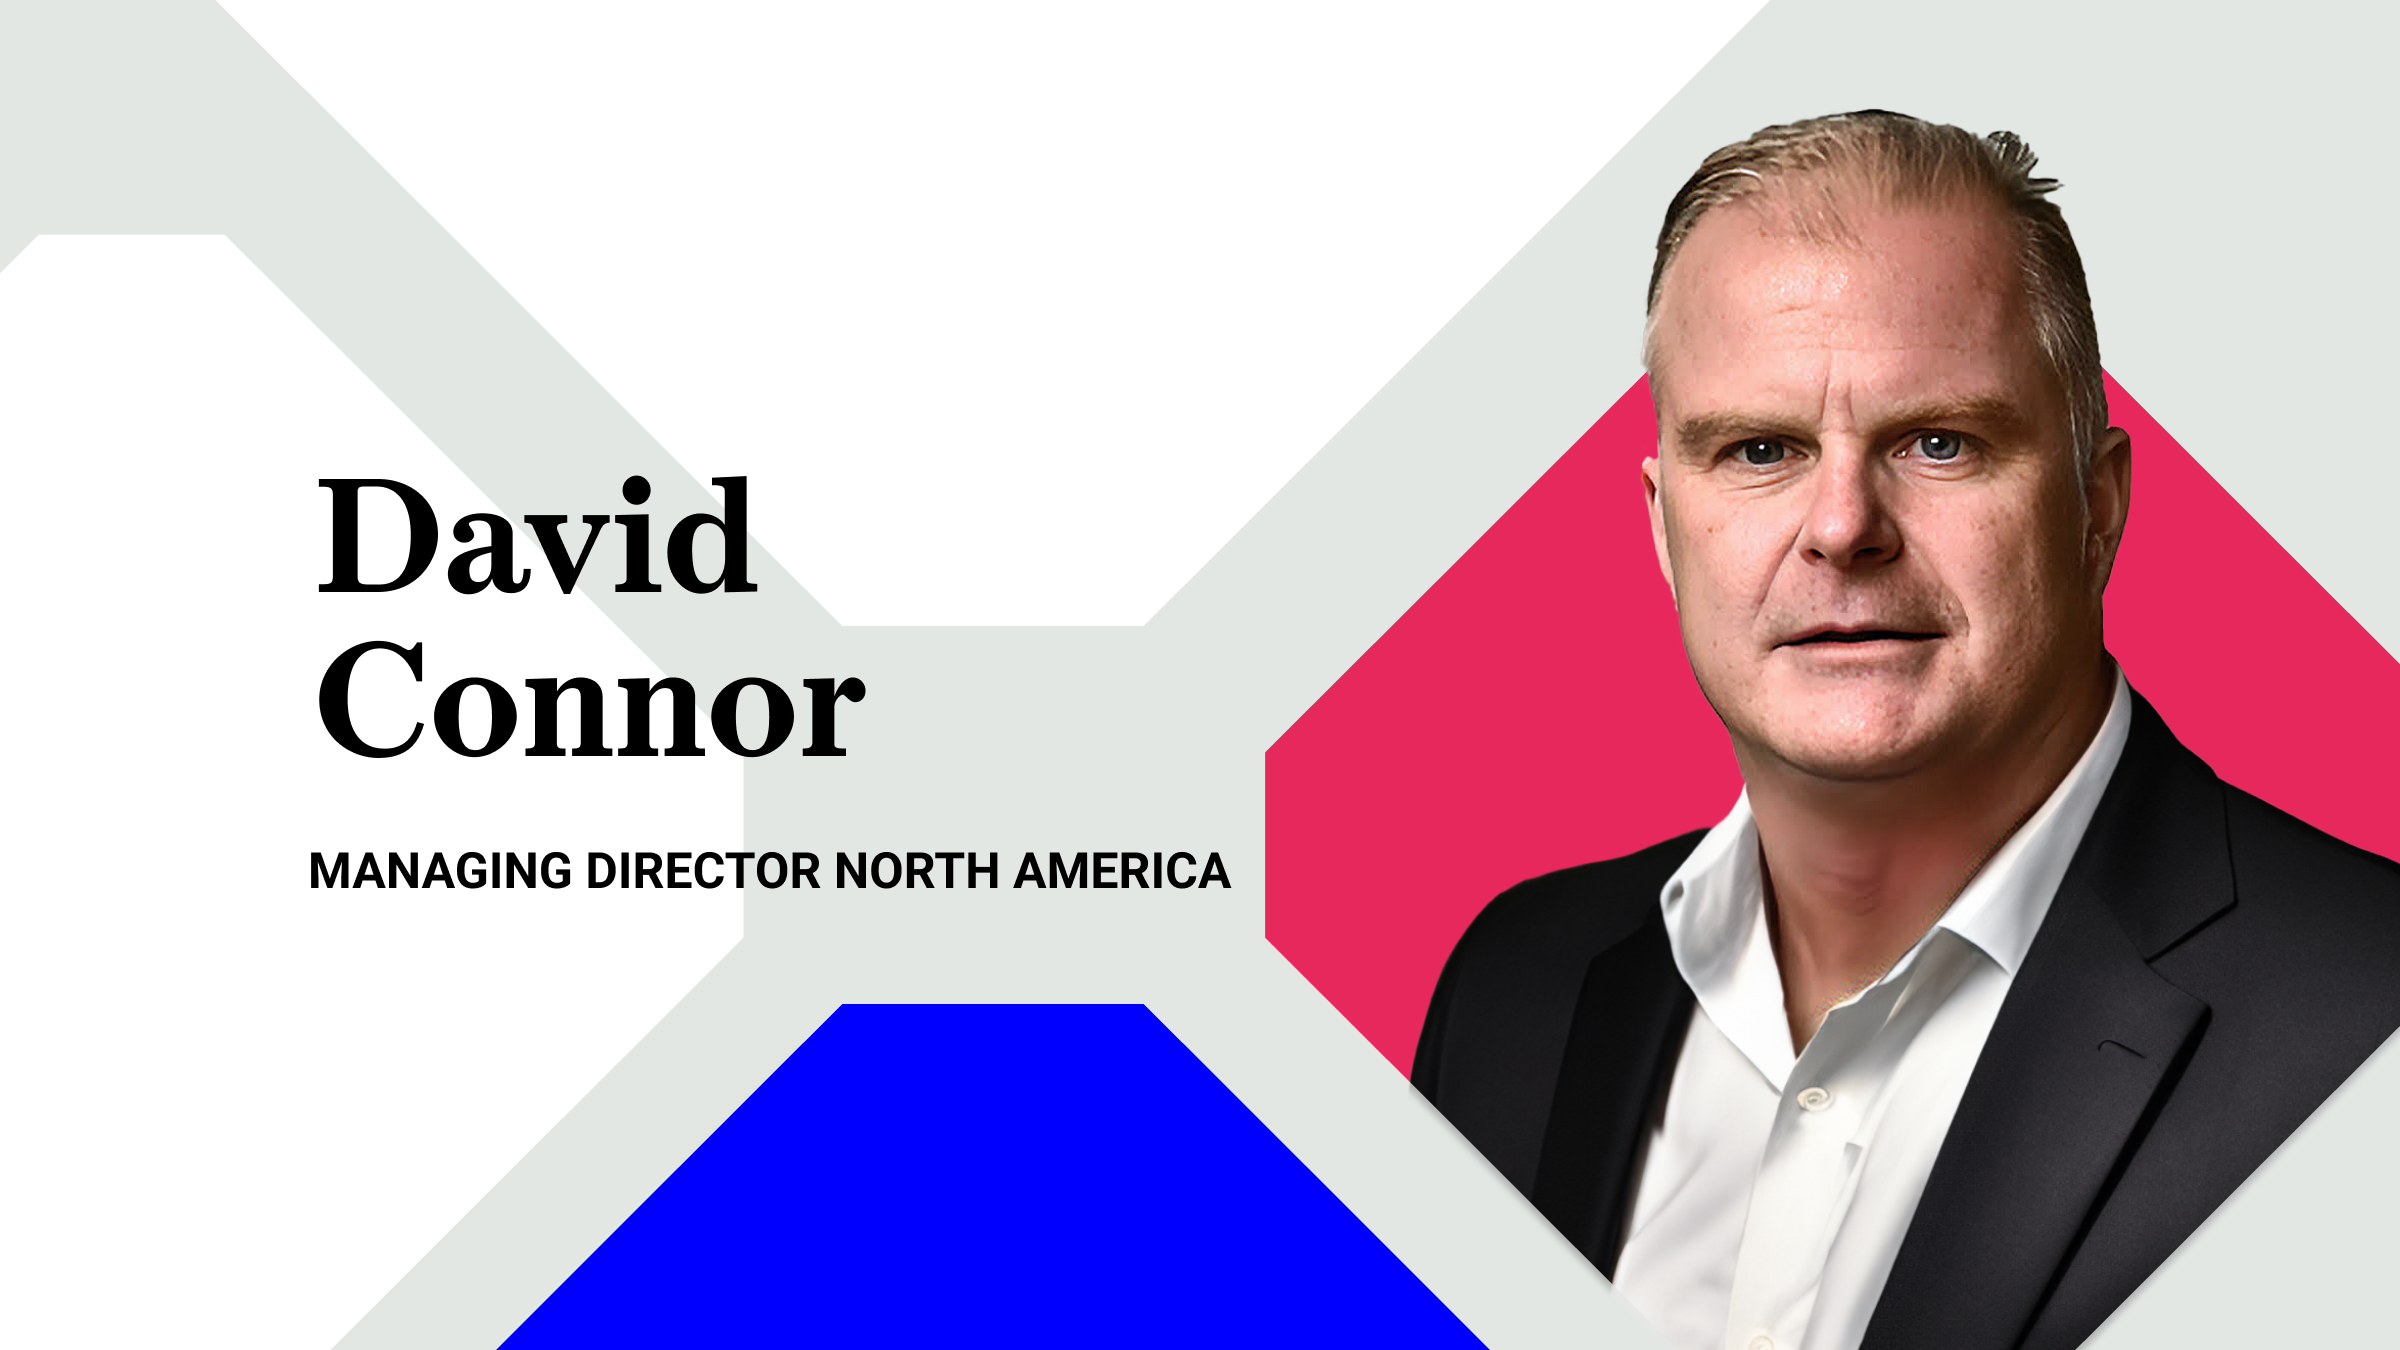 David Connor joins InvestSuite as Managing Director for North America